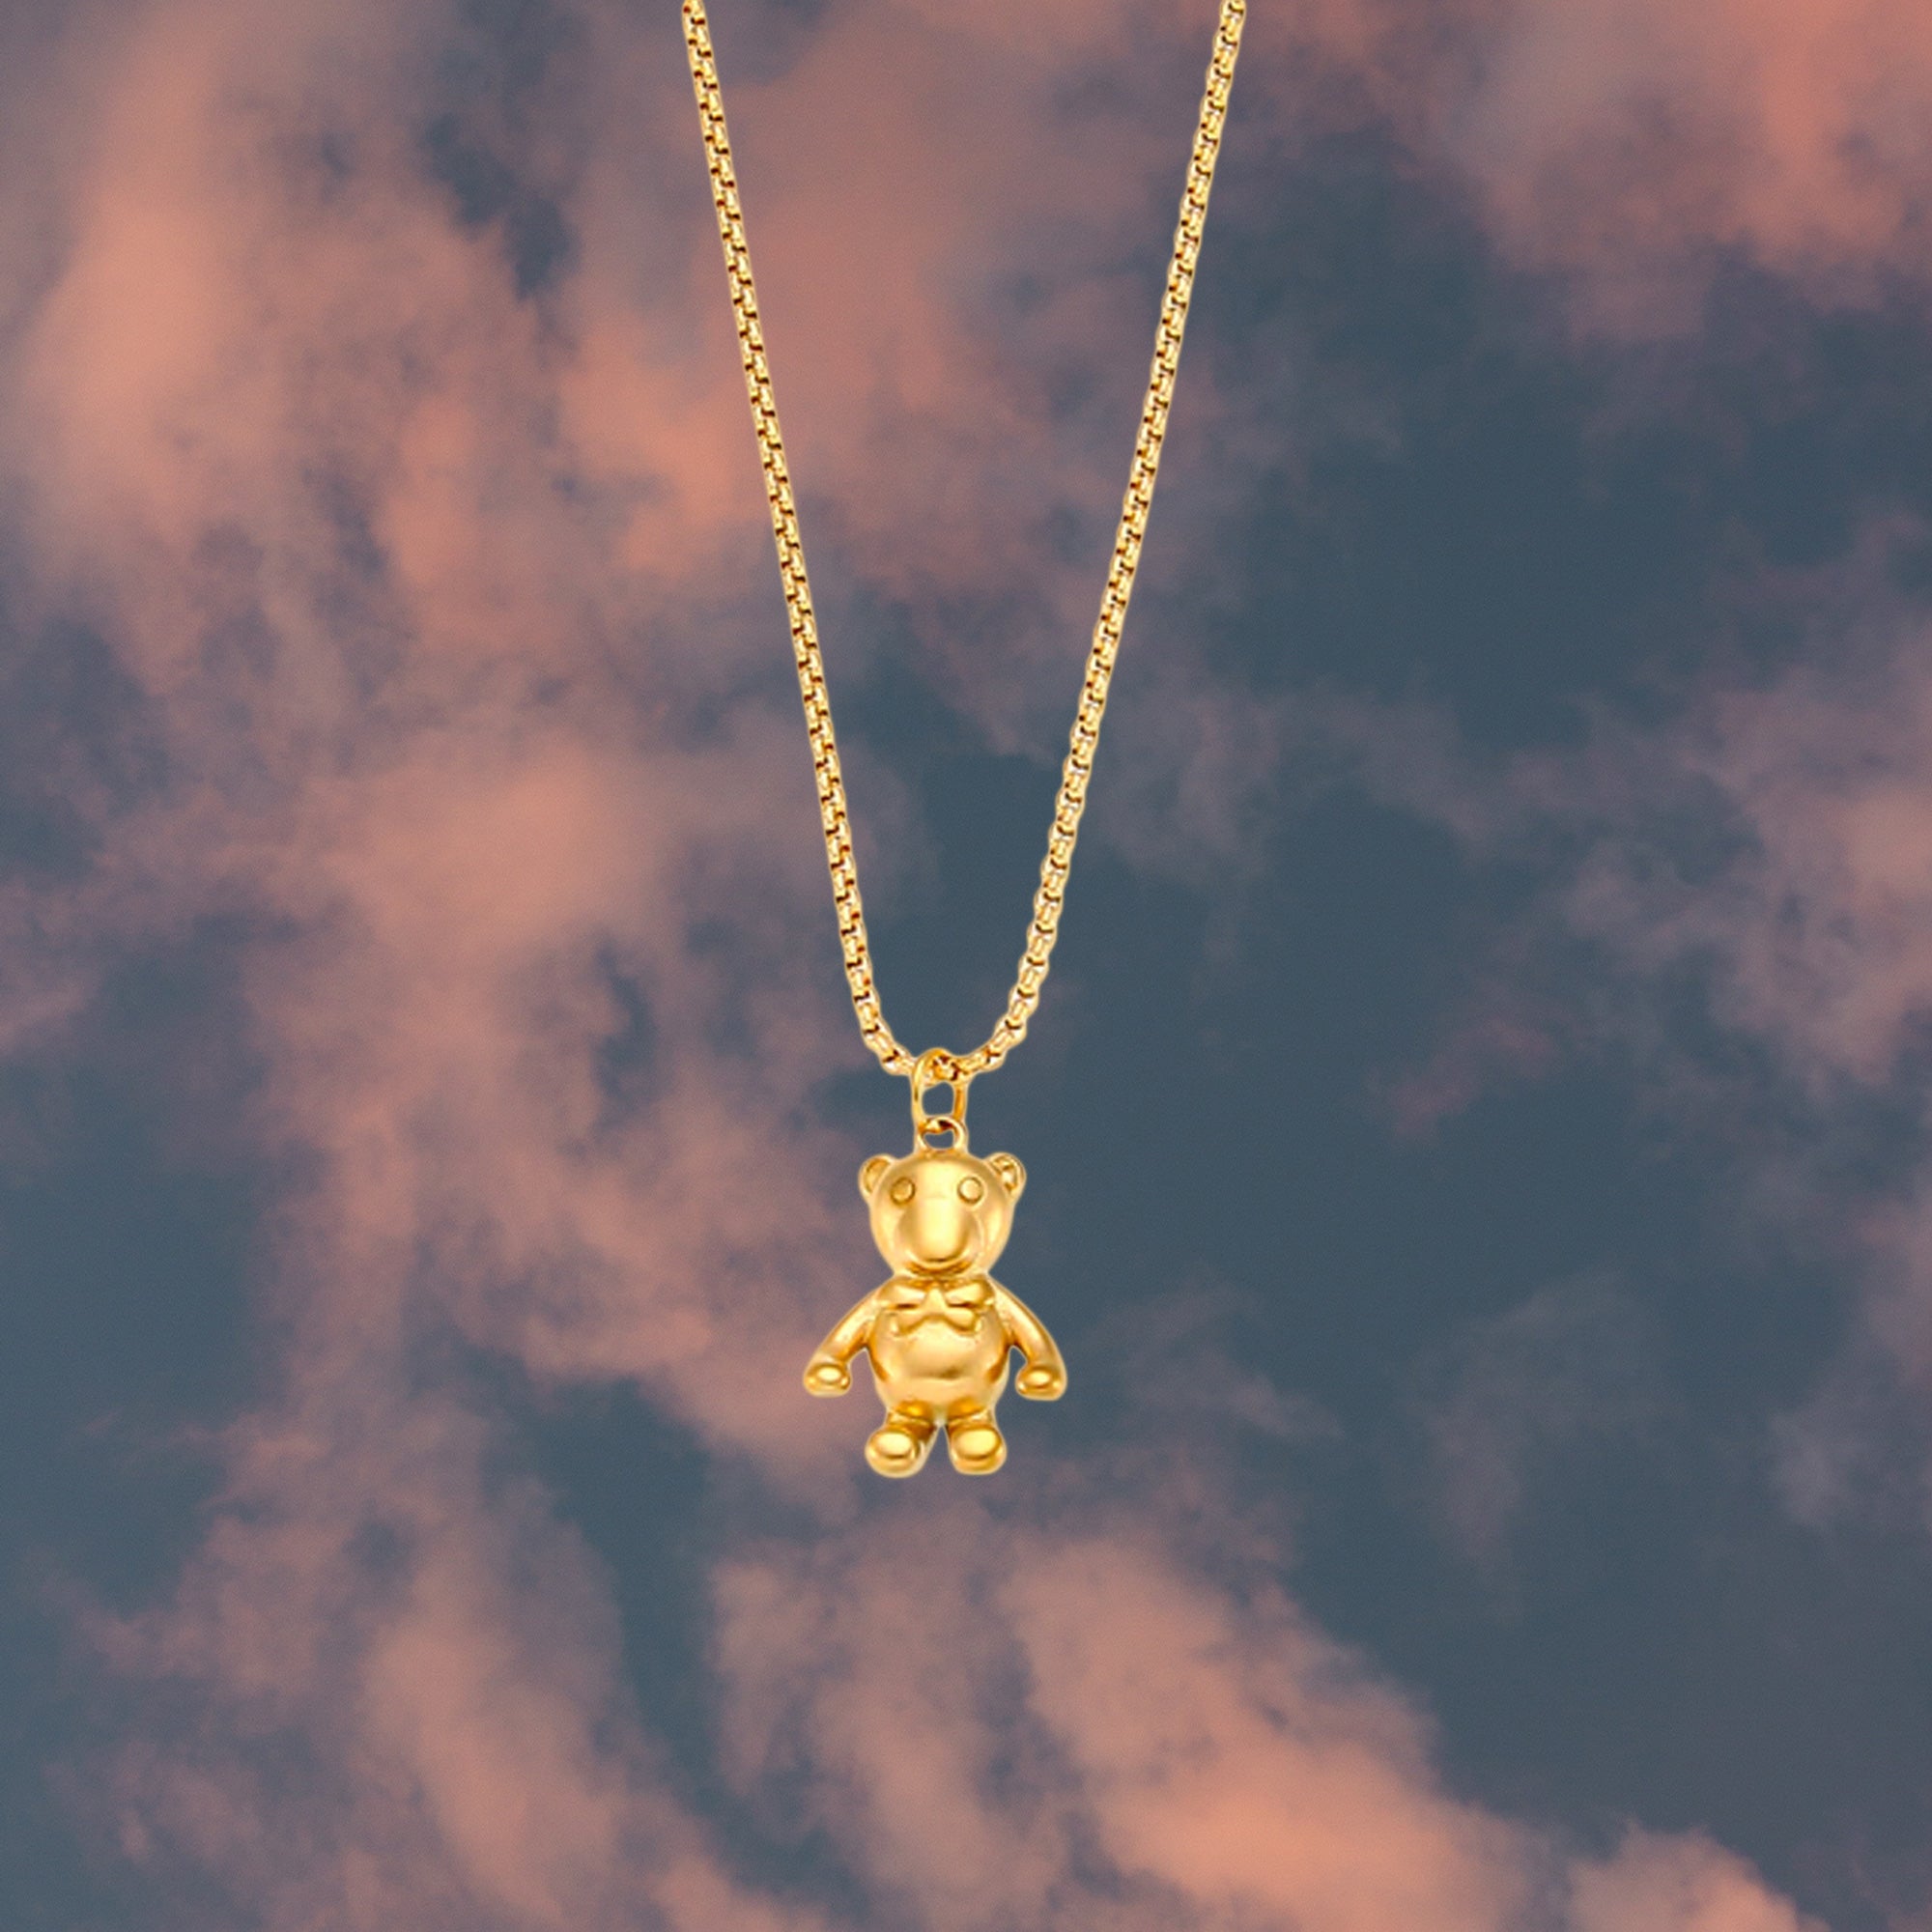 Teddy Bear Necklace - Time's Reel